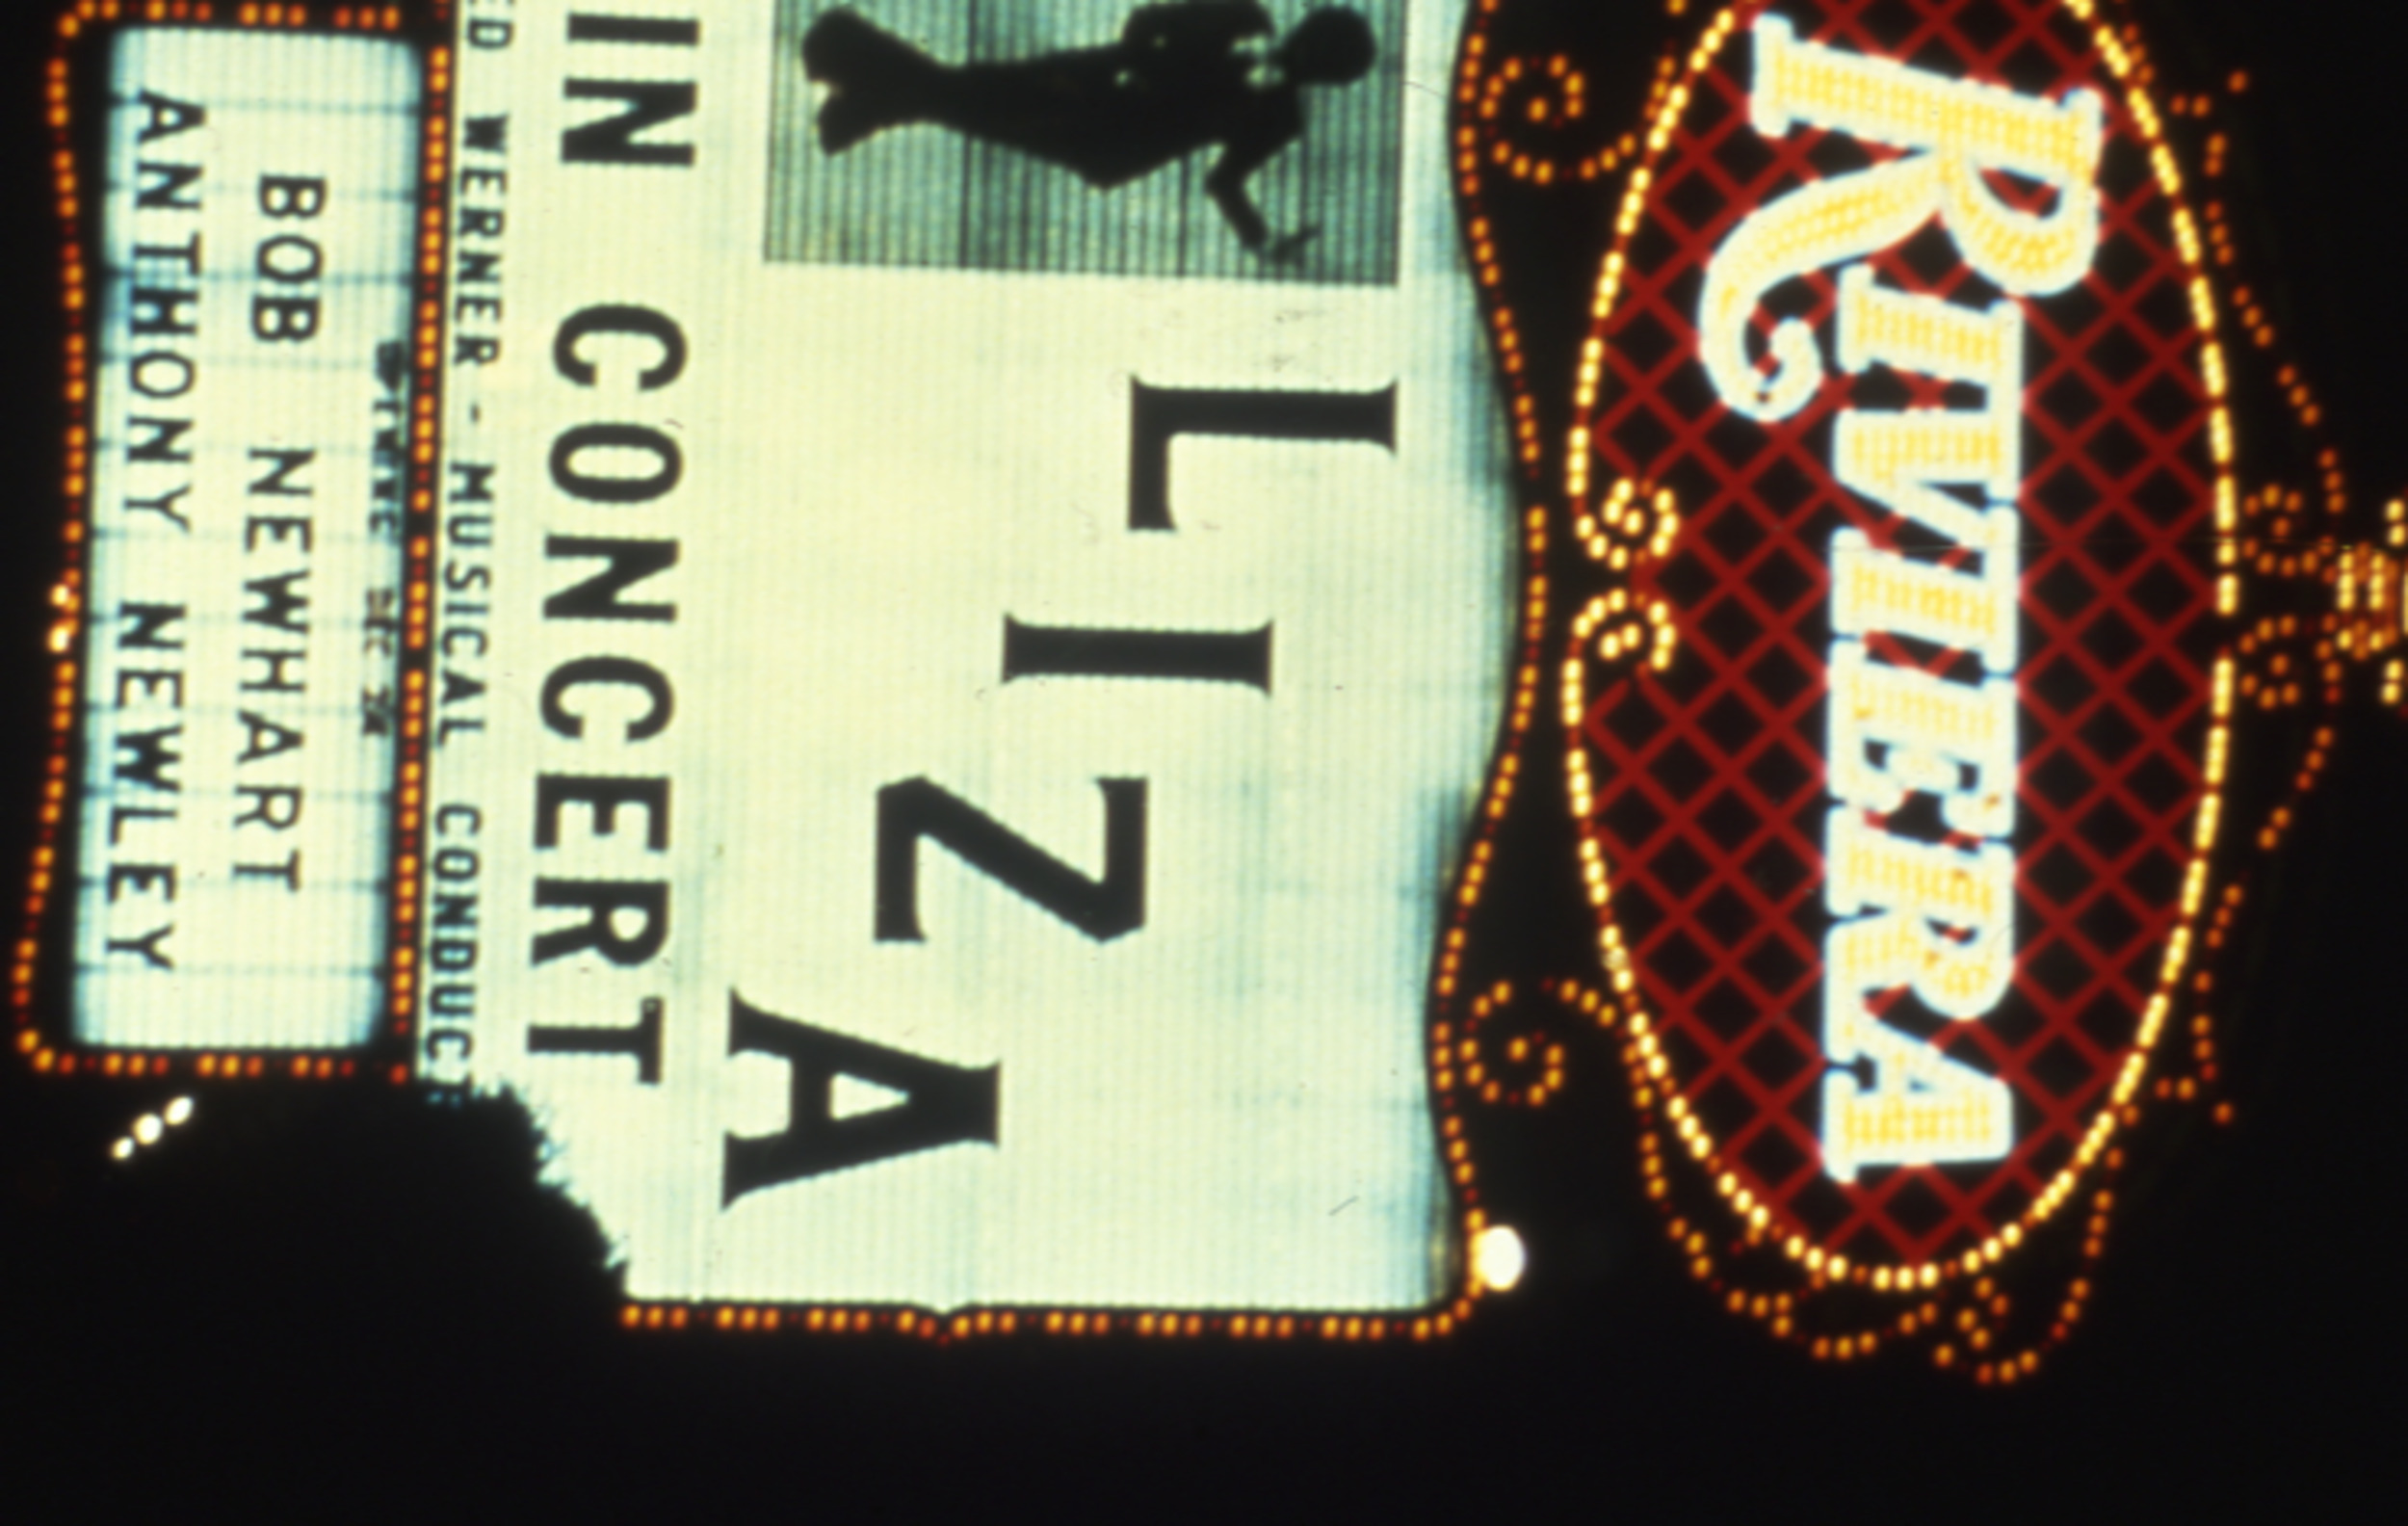 Slide of the Riviera Hotel marquee at night, Las Vegas, Nevada, 1986